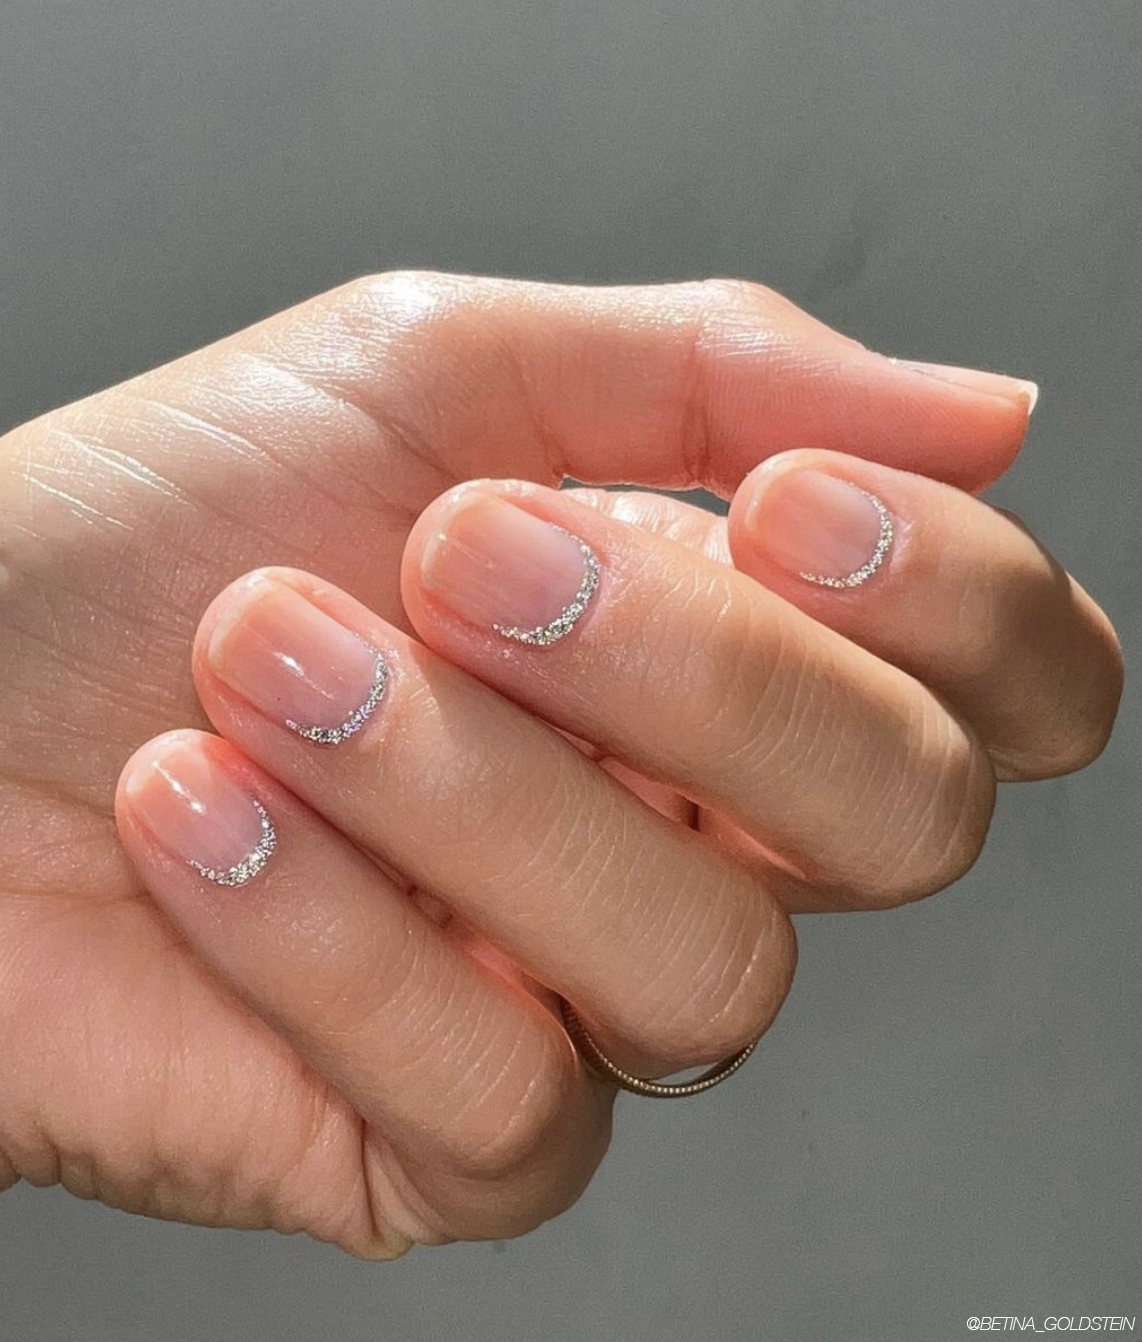 Short and Chic: 30 Classy Nail Designs for Short Nails | Art and Design-thanhphatduhoc.com.vn